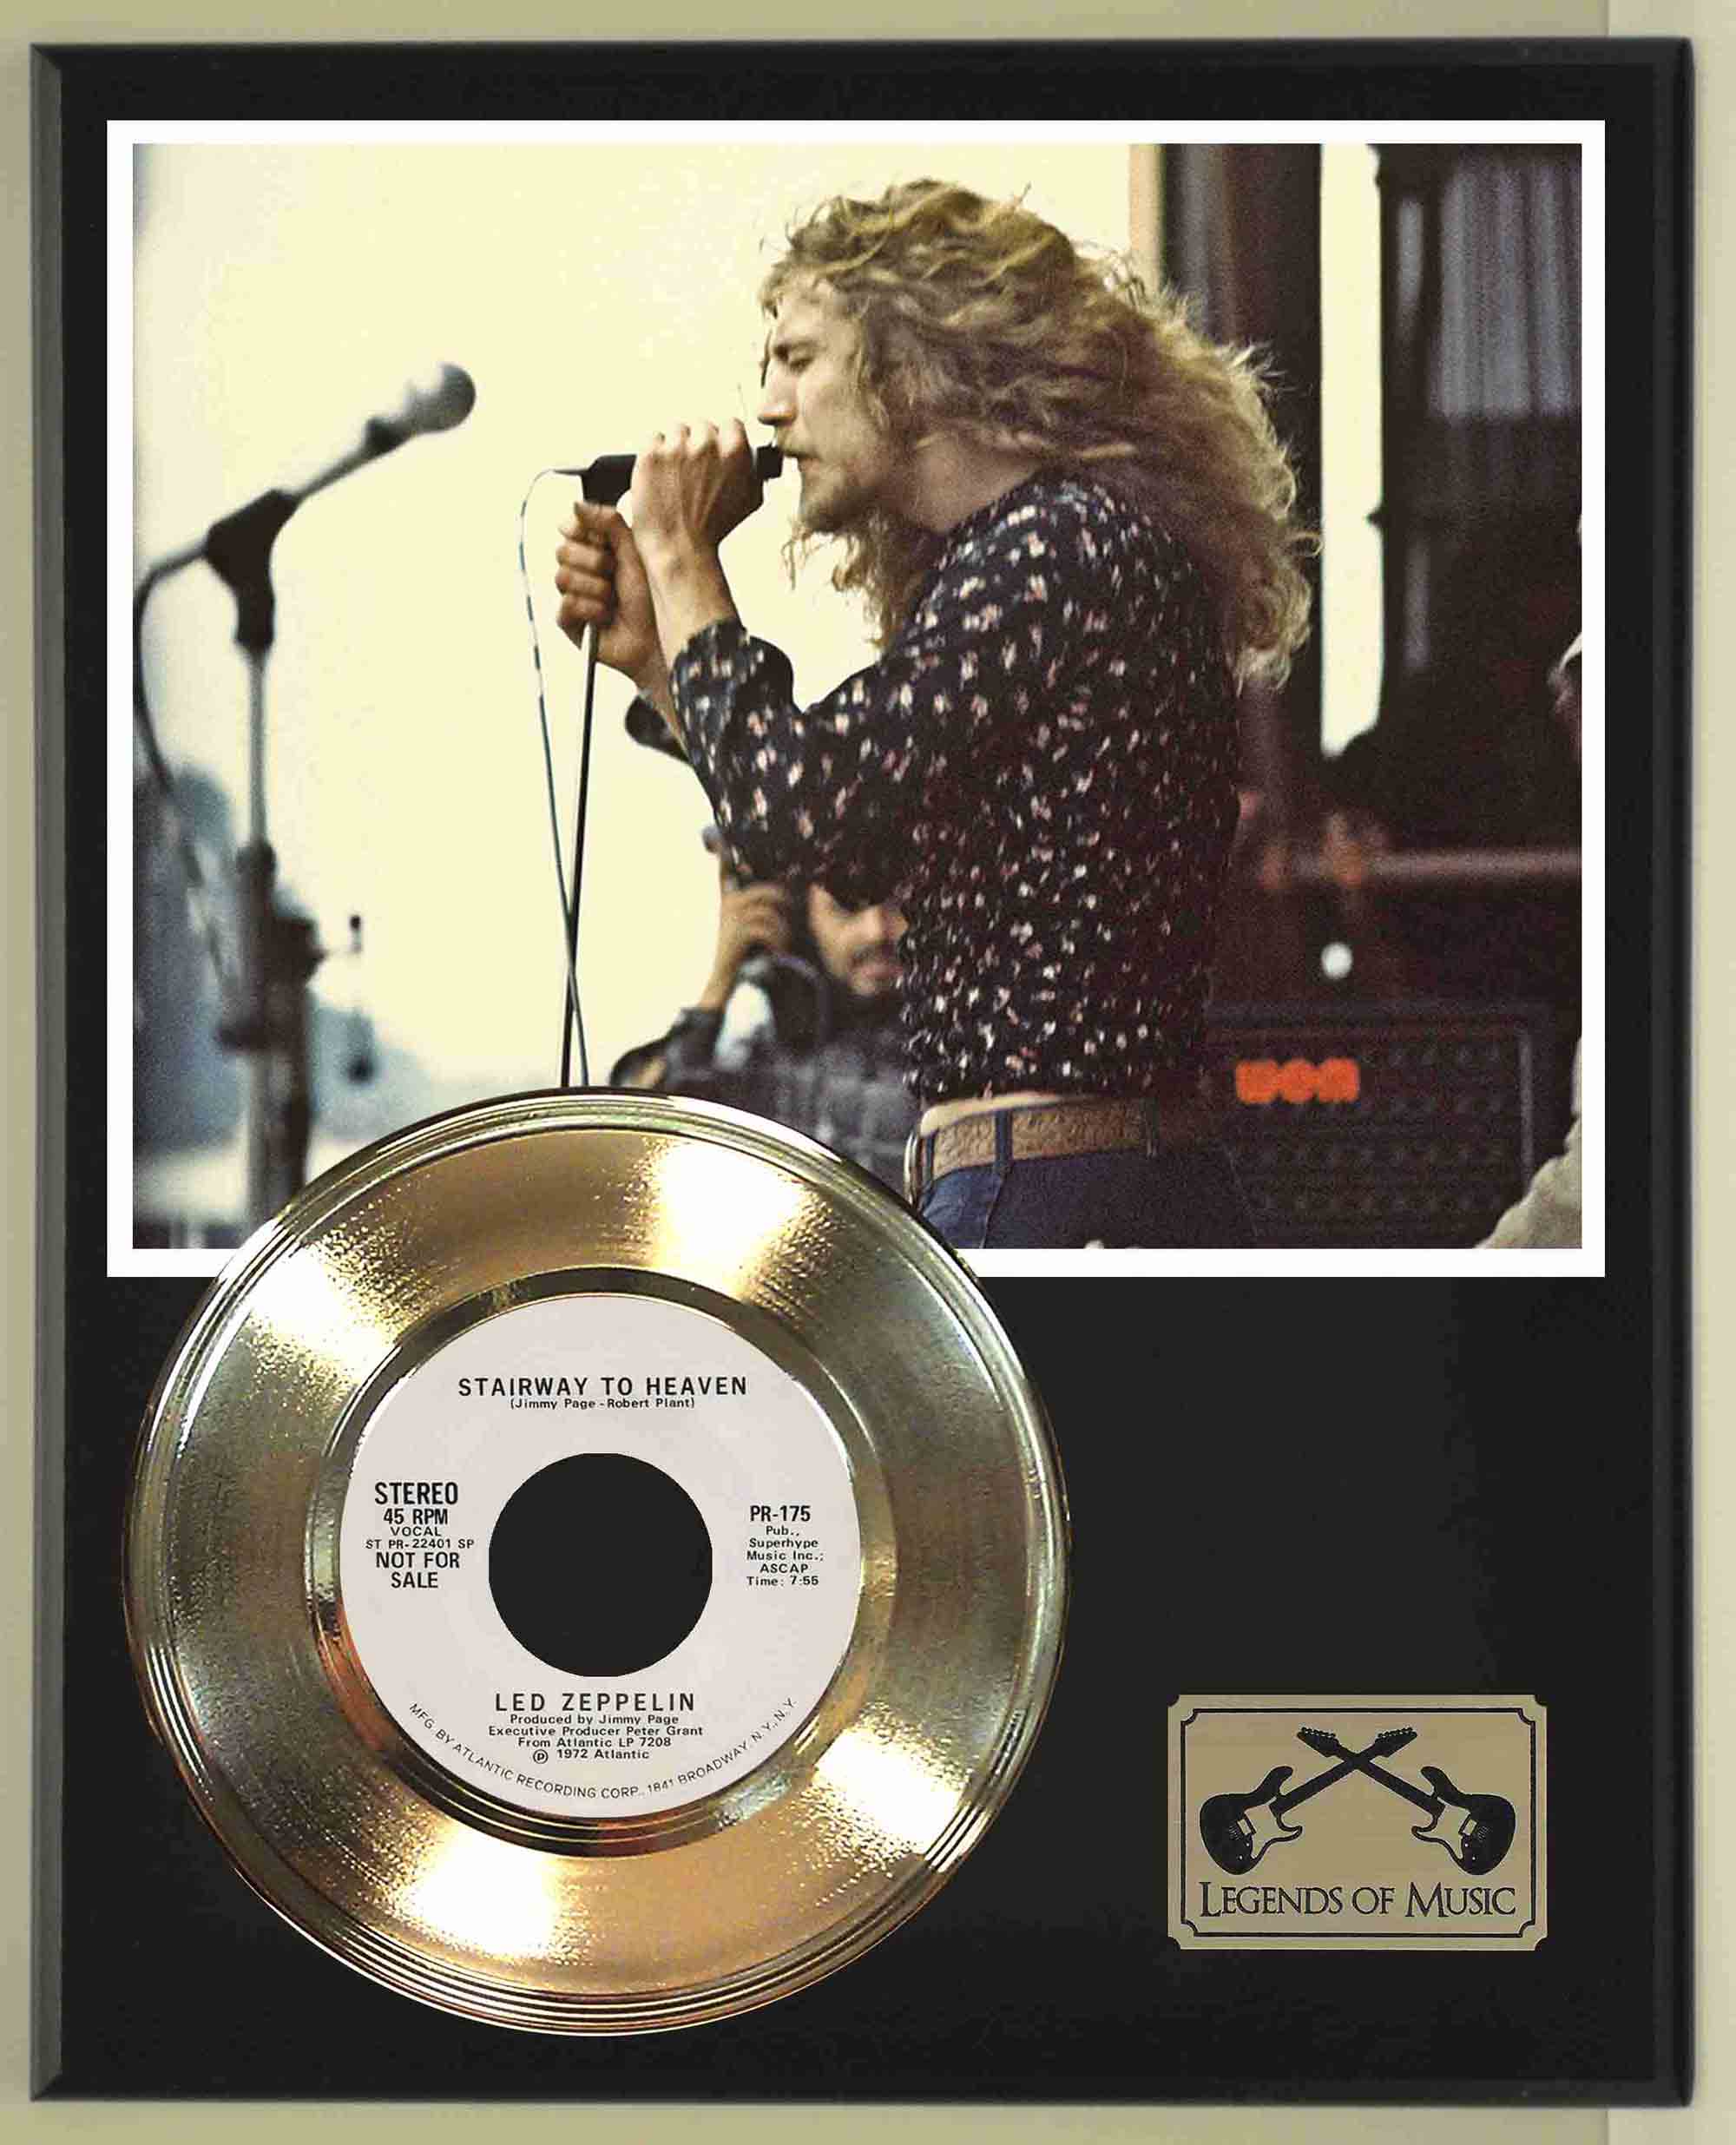 Led Zeppelin Stairway To Heaven Etched Gold 45 Record Ltd Edition Display -  Gold Record Outlet Album and Disc Collectible Memorabilia